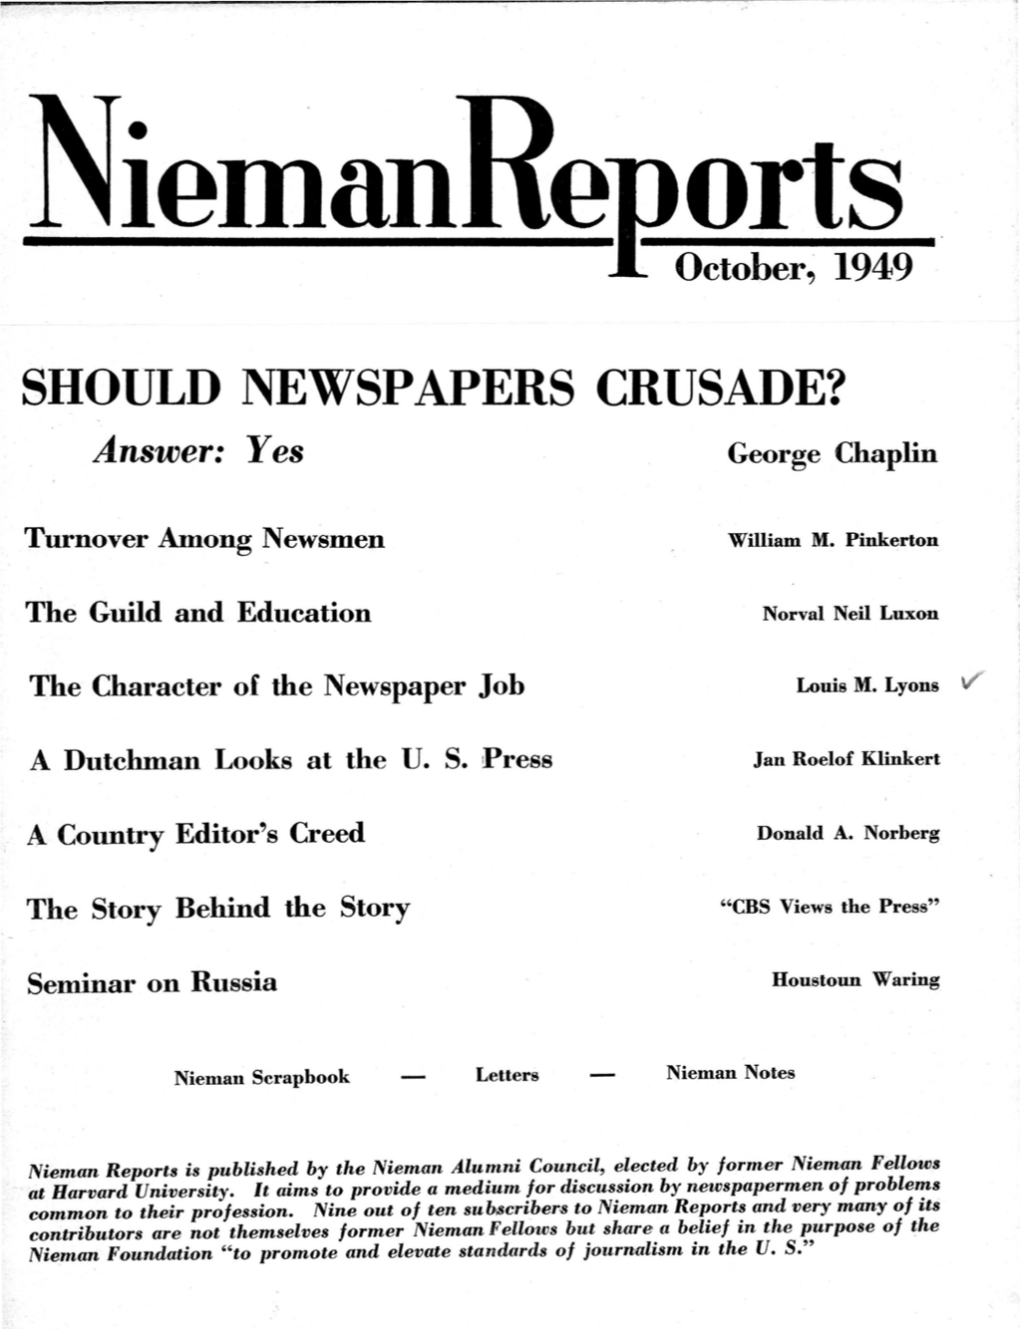 SHOULD NEWSPAPERS CRUSADE? Answer: Yes George Chaplin